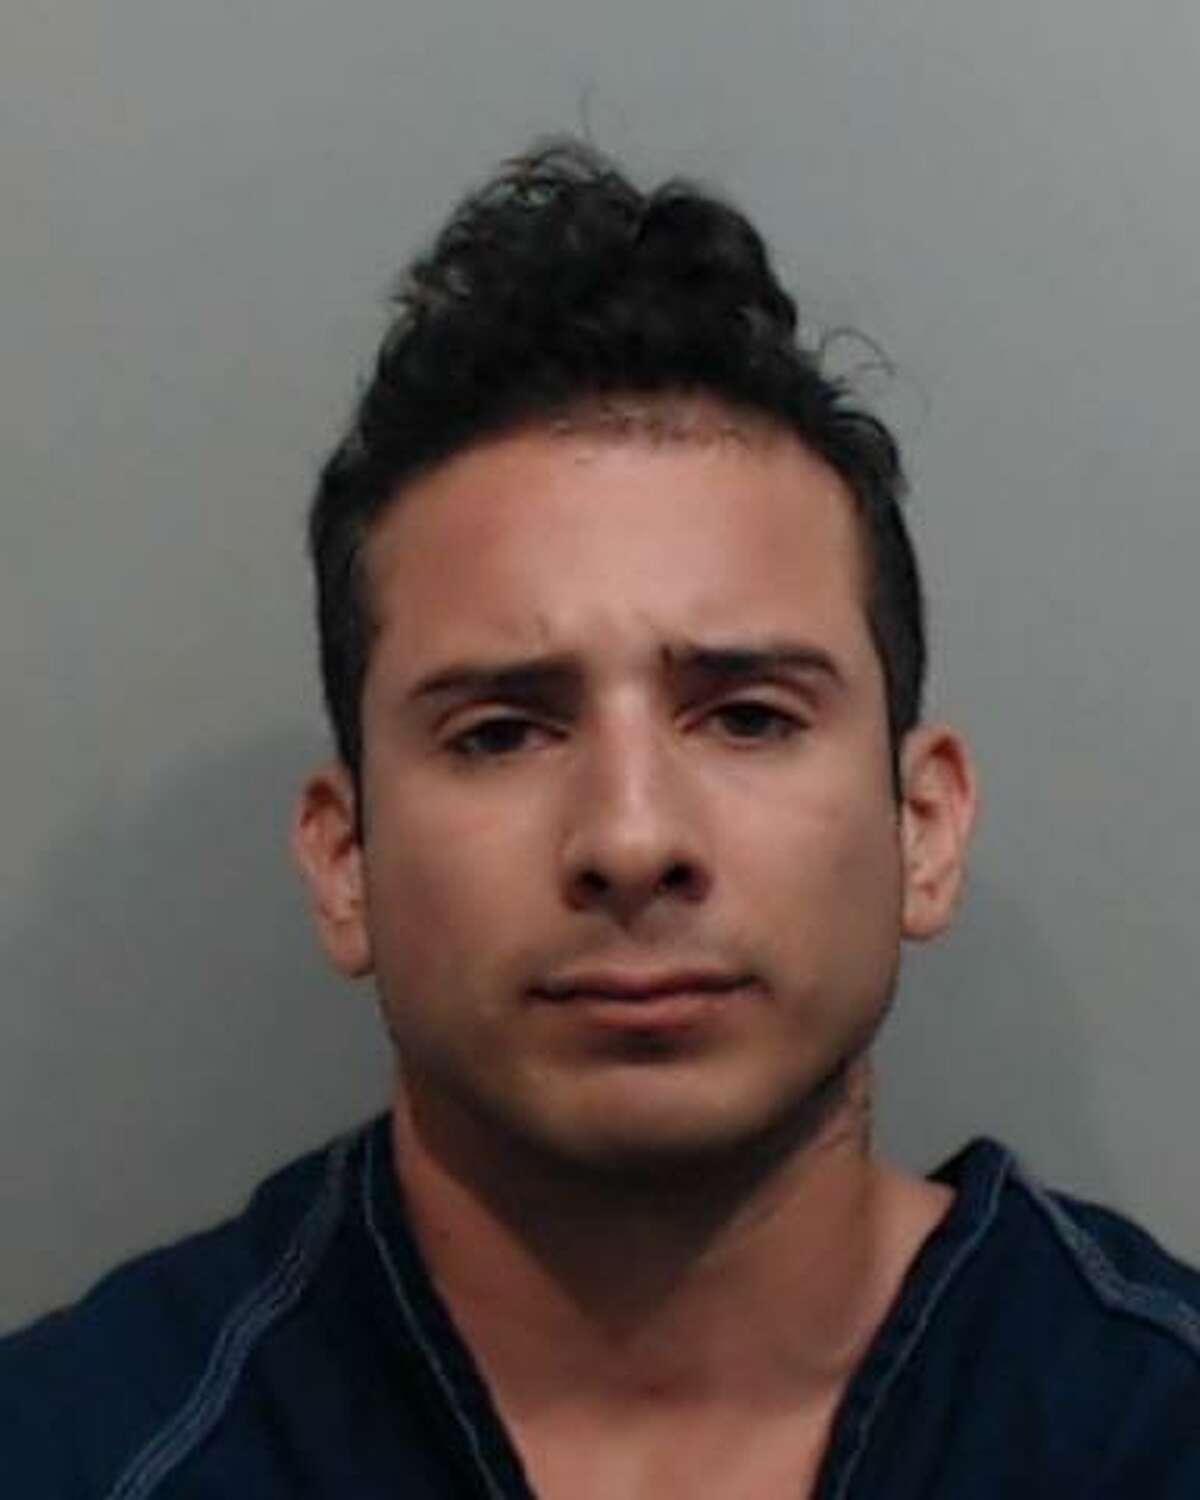 Jose Ernesto Chavez, 29, was arrested Friday, April 26, 2019, on multiple charges related to burglary of a habitation after he allegedly broke into several dorm rooms at Texas State University to watch women sleep and take their items, according to university police. He is being held in the Hays County Jail with bail set at $150,000.